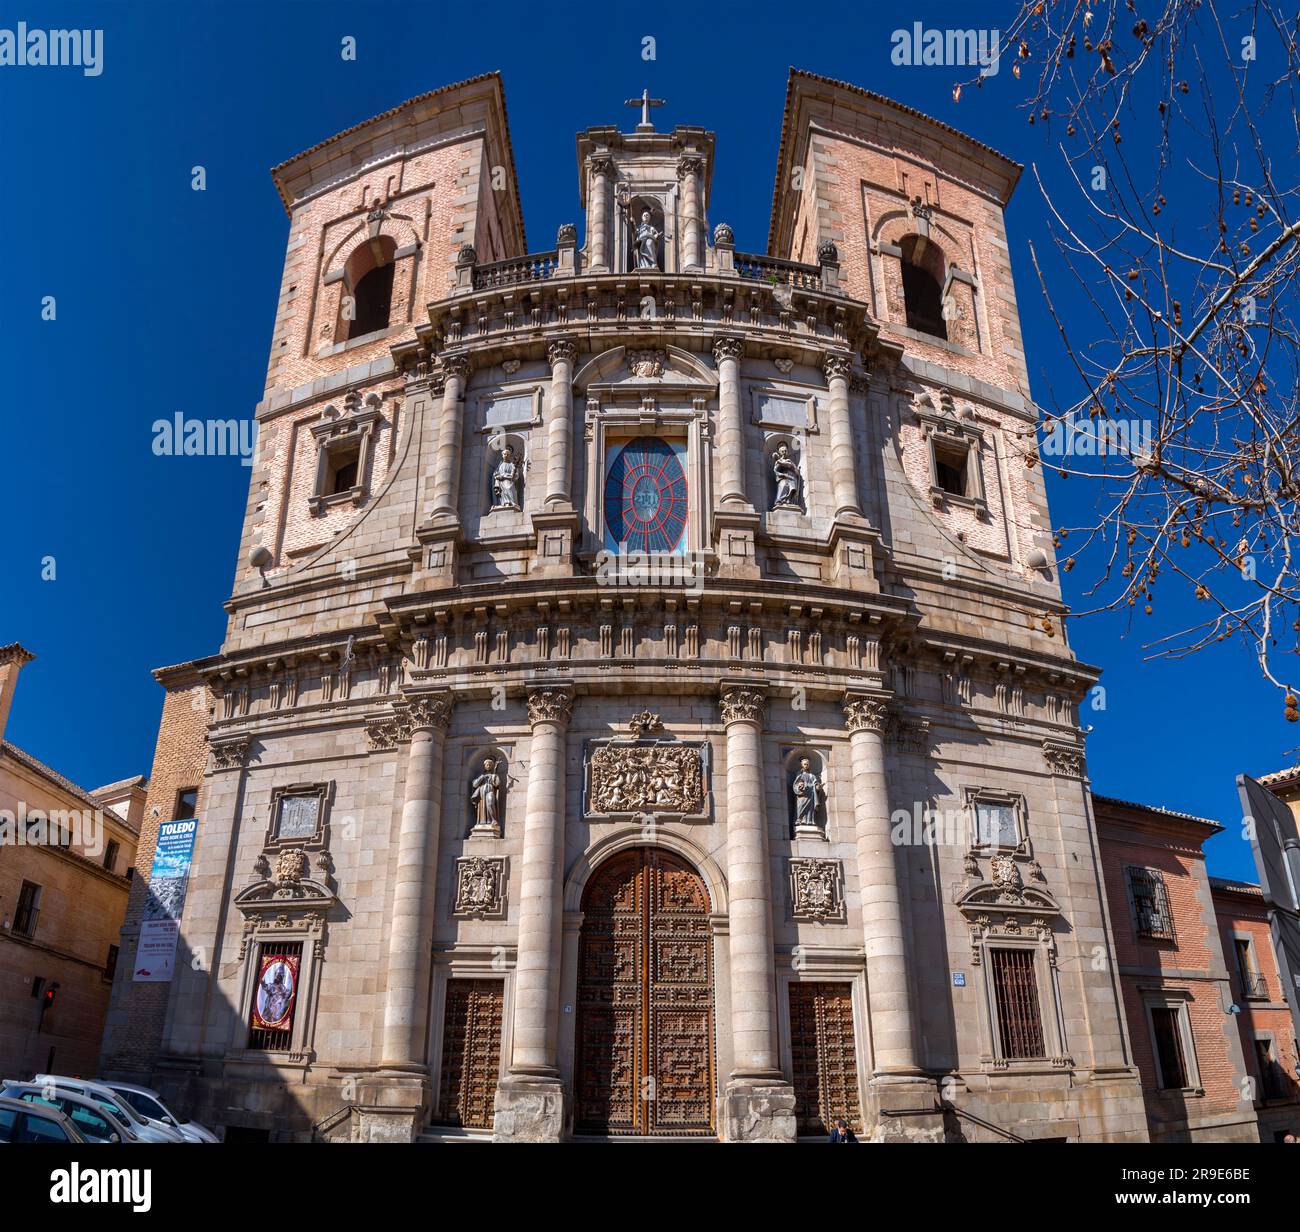 Toledo, Spain-FEB 17, 2022: The Church of San Ildefonso, Iglesia de San Ildefonso is a Baroque style church located in the historic center of Toledo, Stock Photo